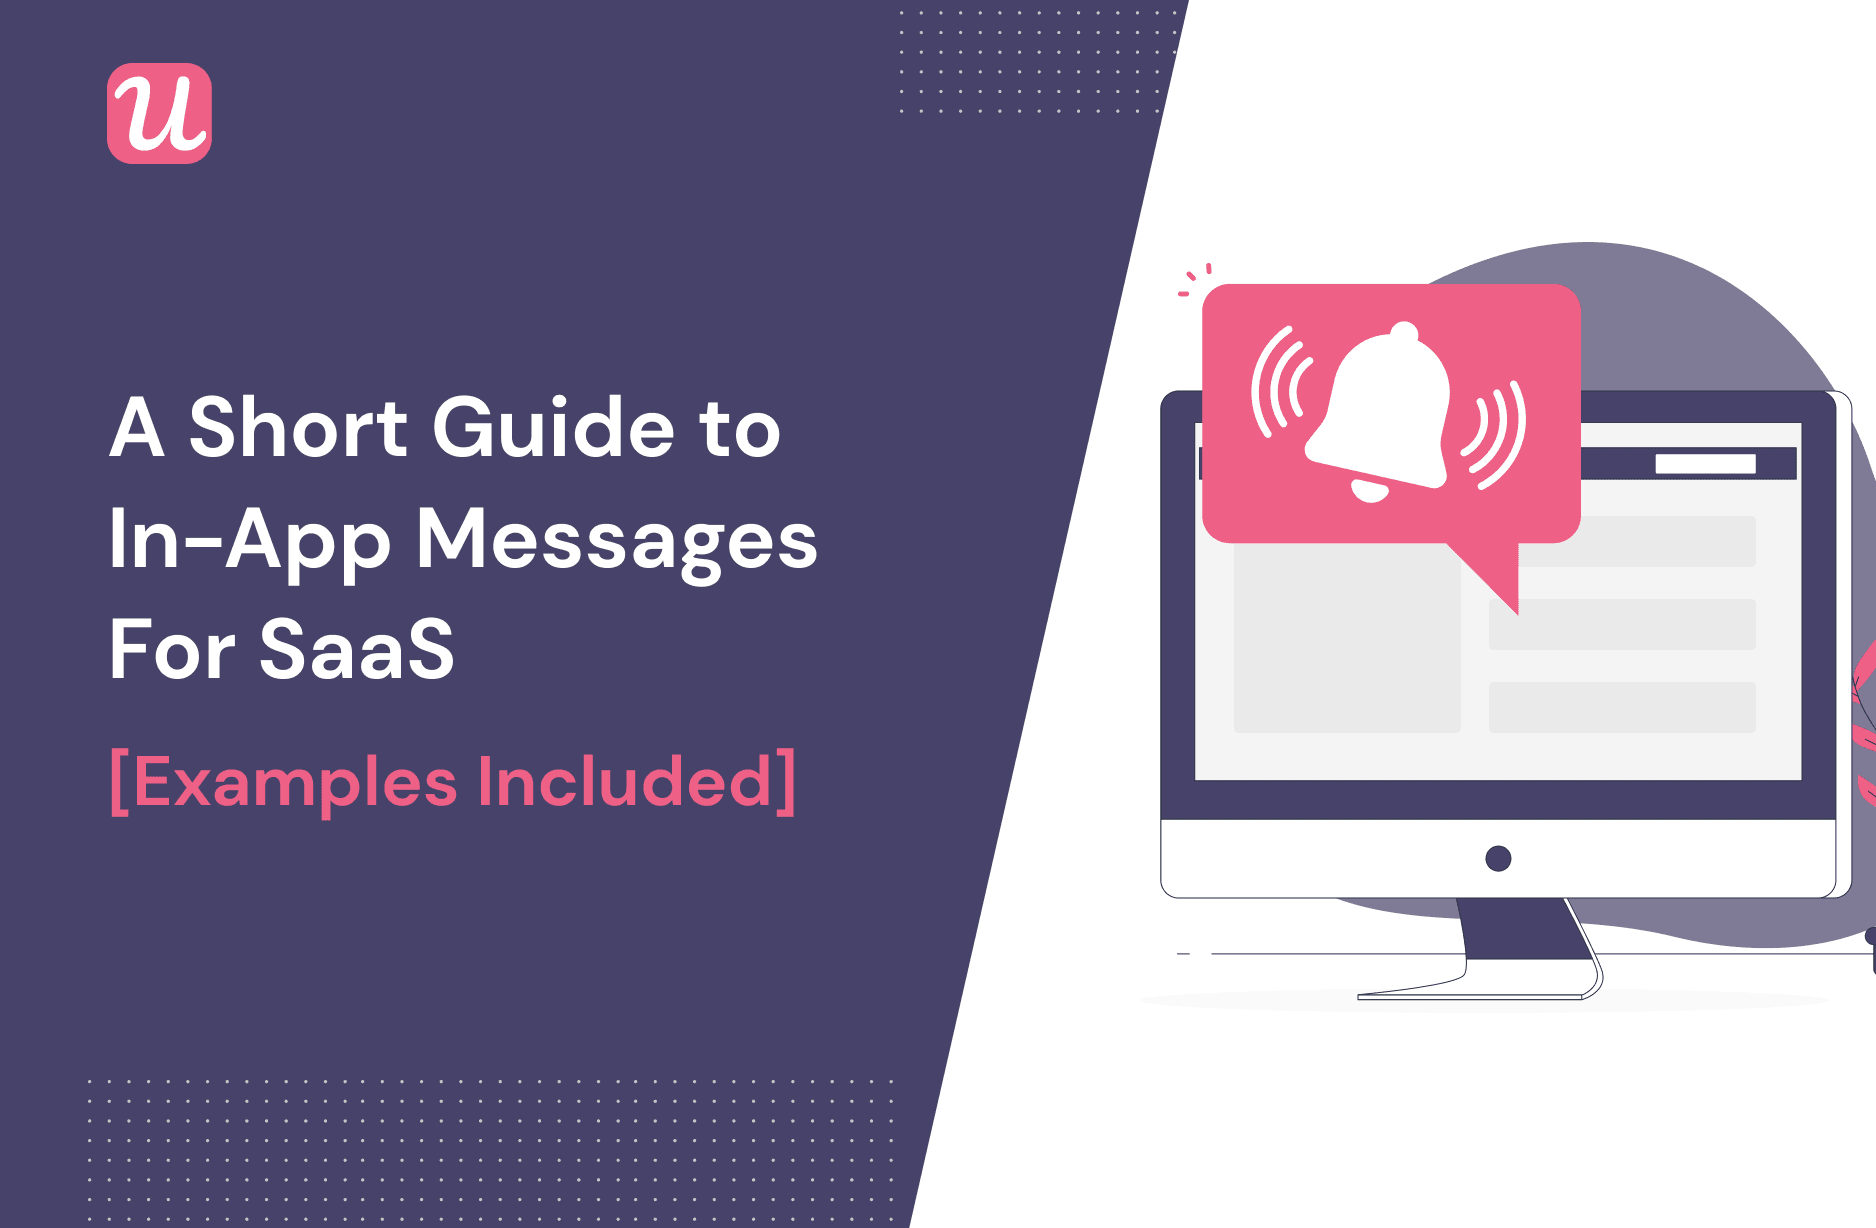 A Short Guide to In-App Messages For SaaS [Examples Included]